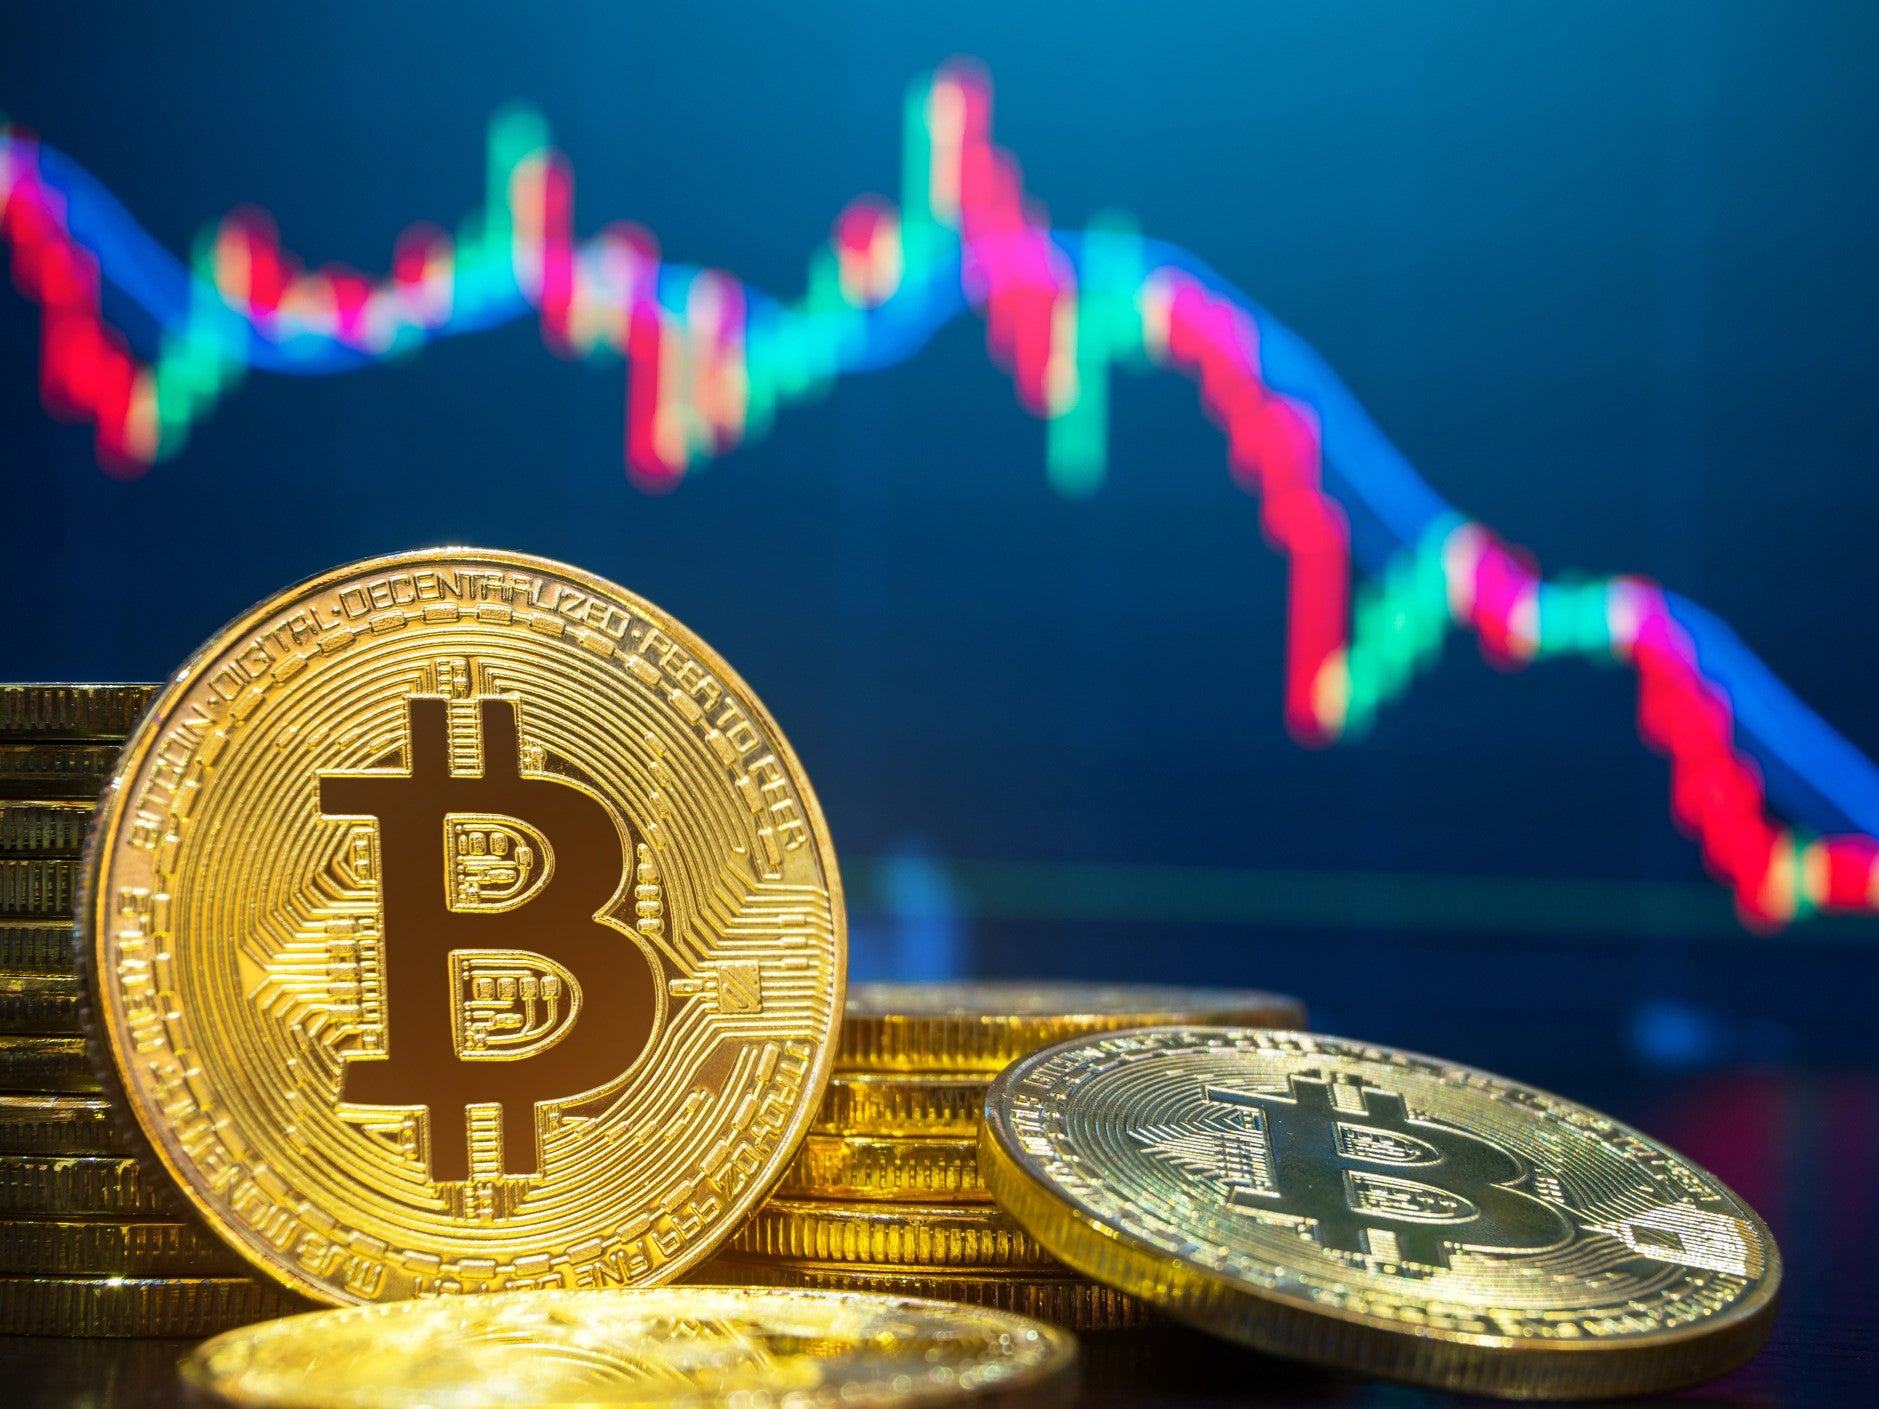 The yo-yo price of bitcoin has made millions for some early investors, but recent months have seen a sharp reversal